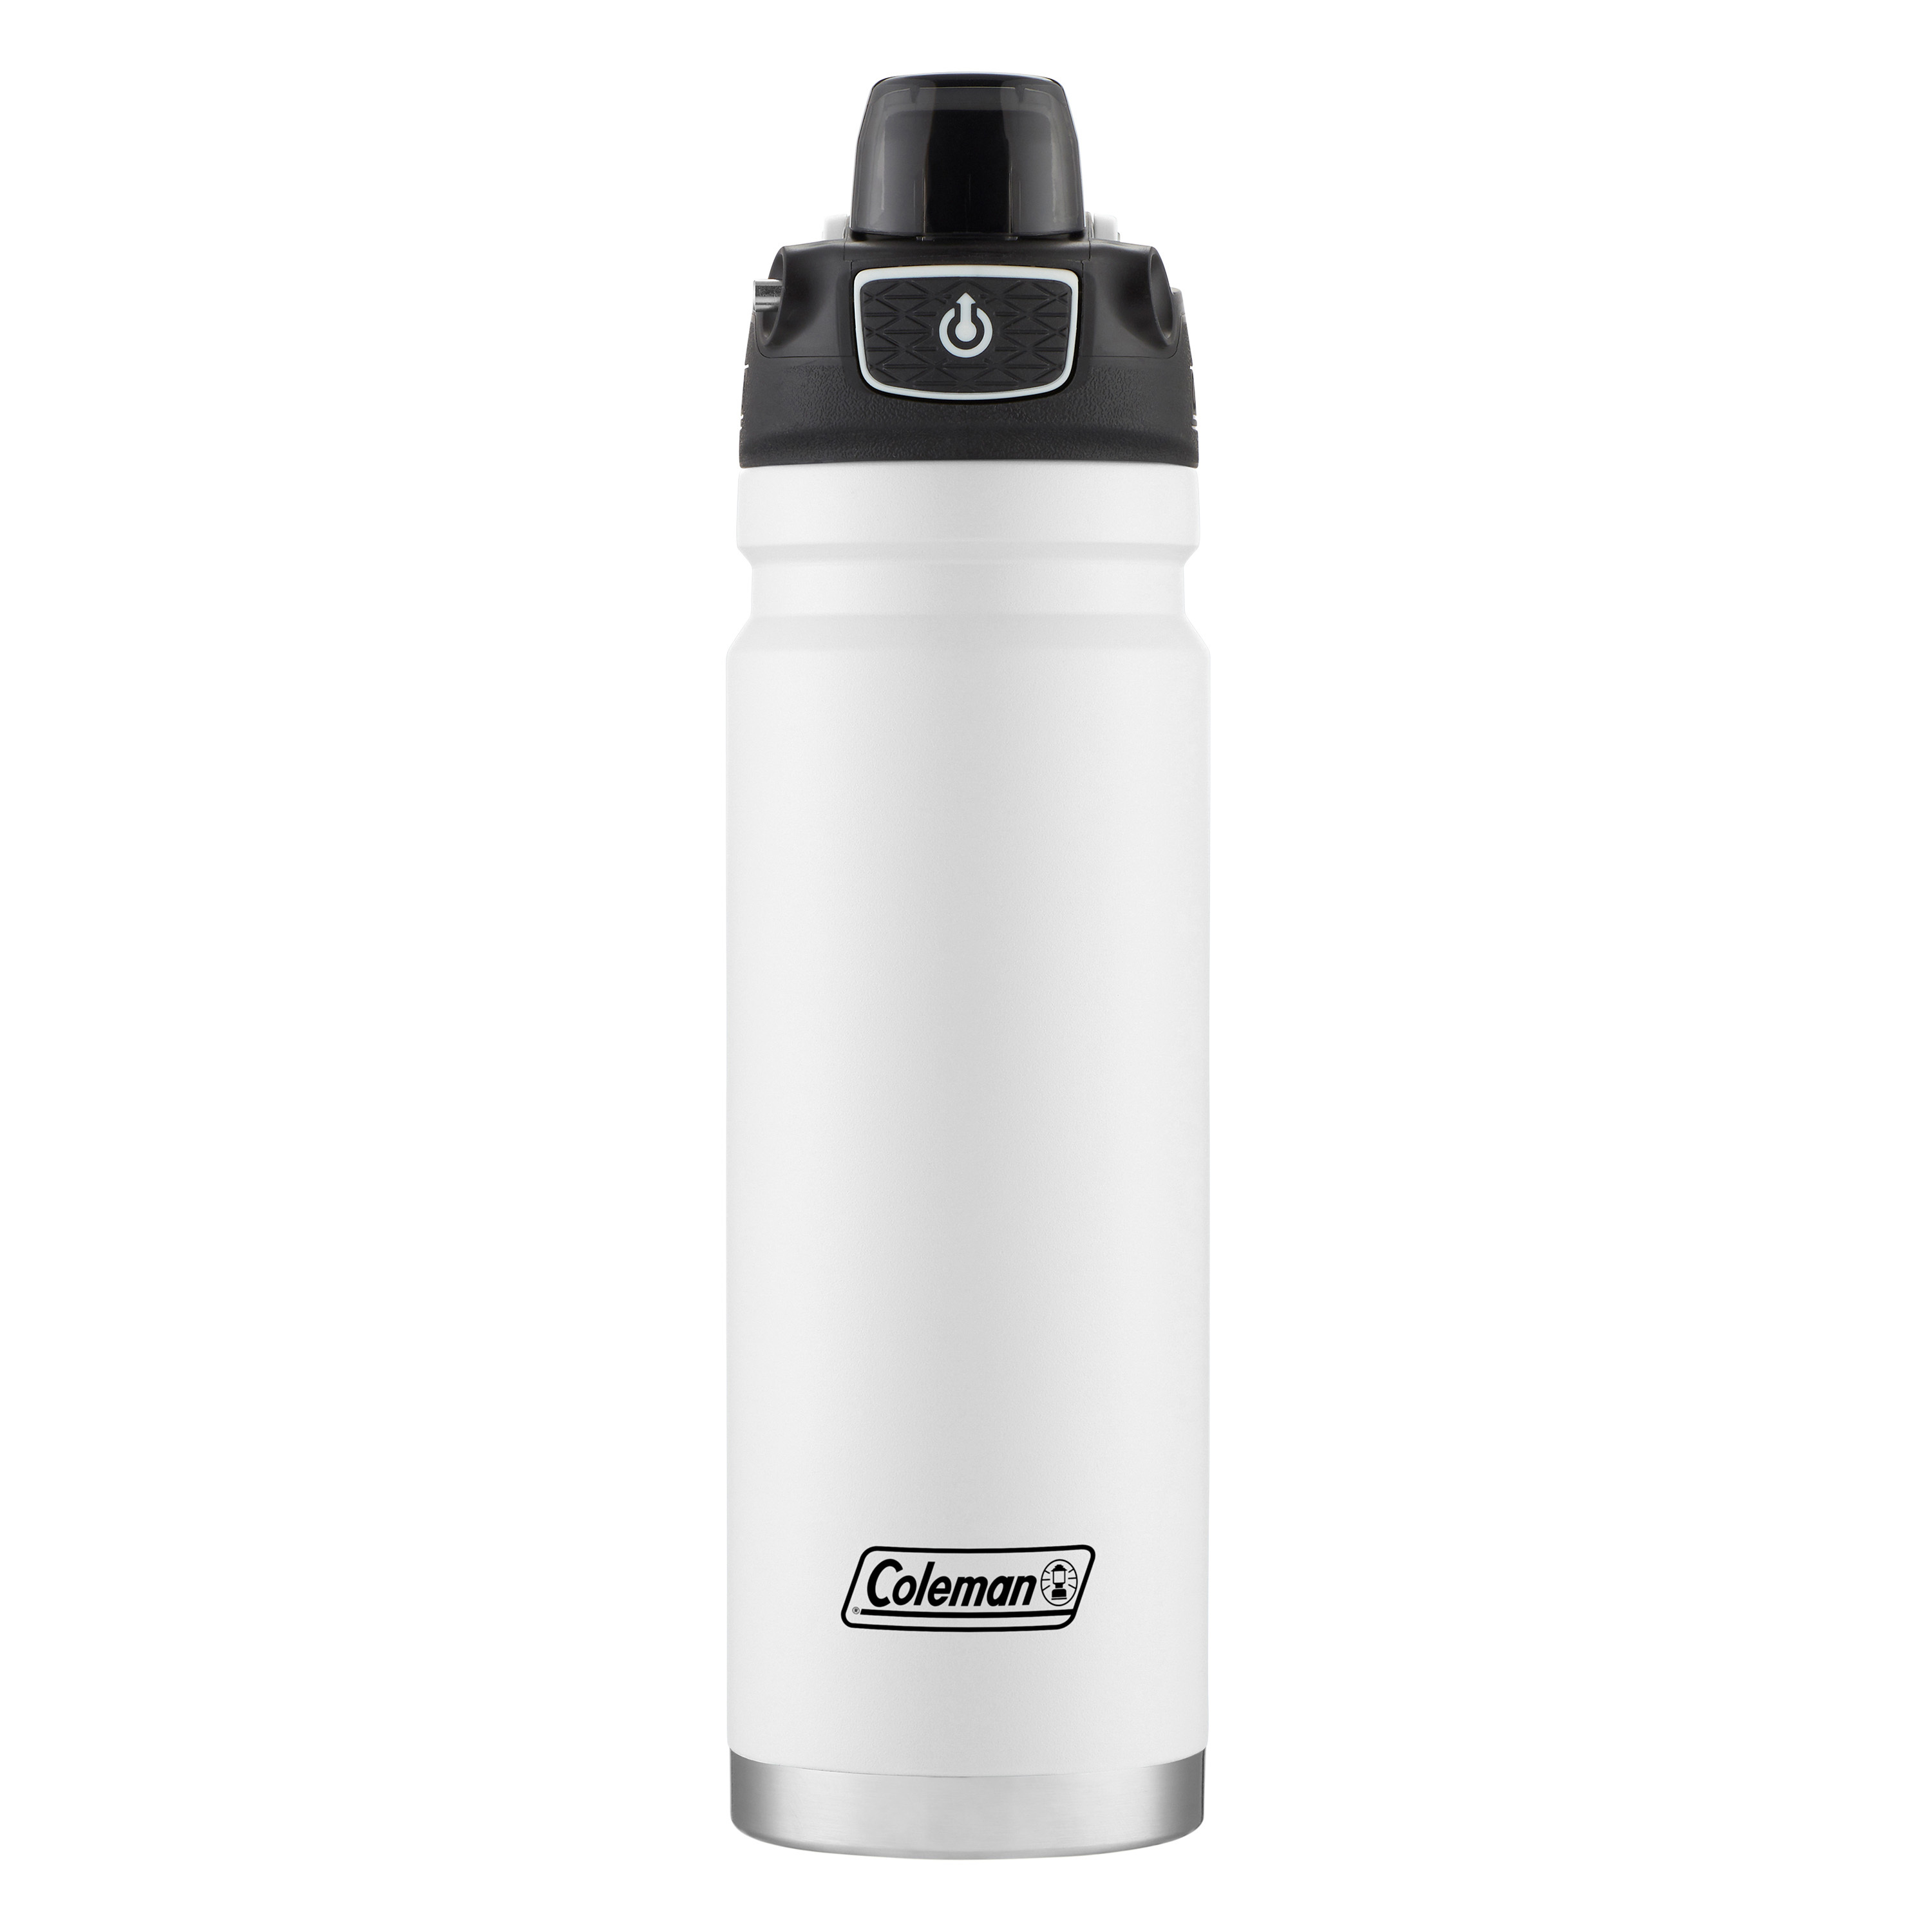 Coleman Burst Poptop Stainless Steel Insulated Water Bottle, 24 oz., White Cloud Color - image 1 of 8